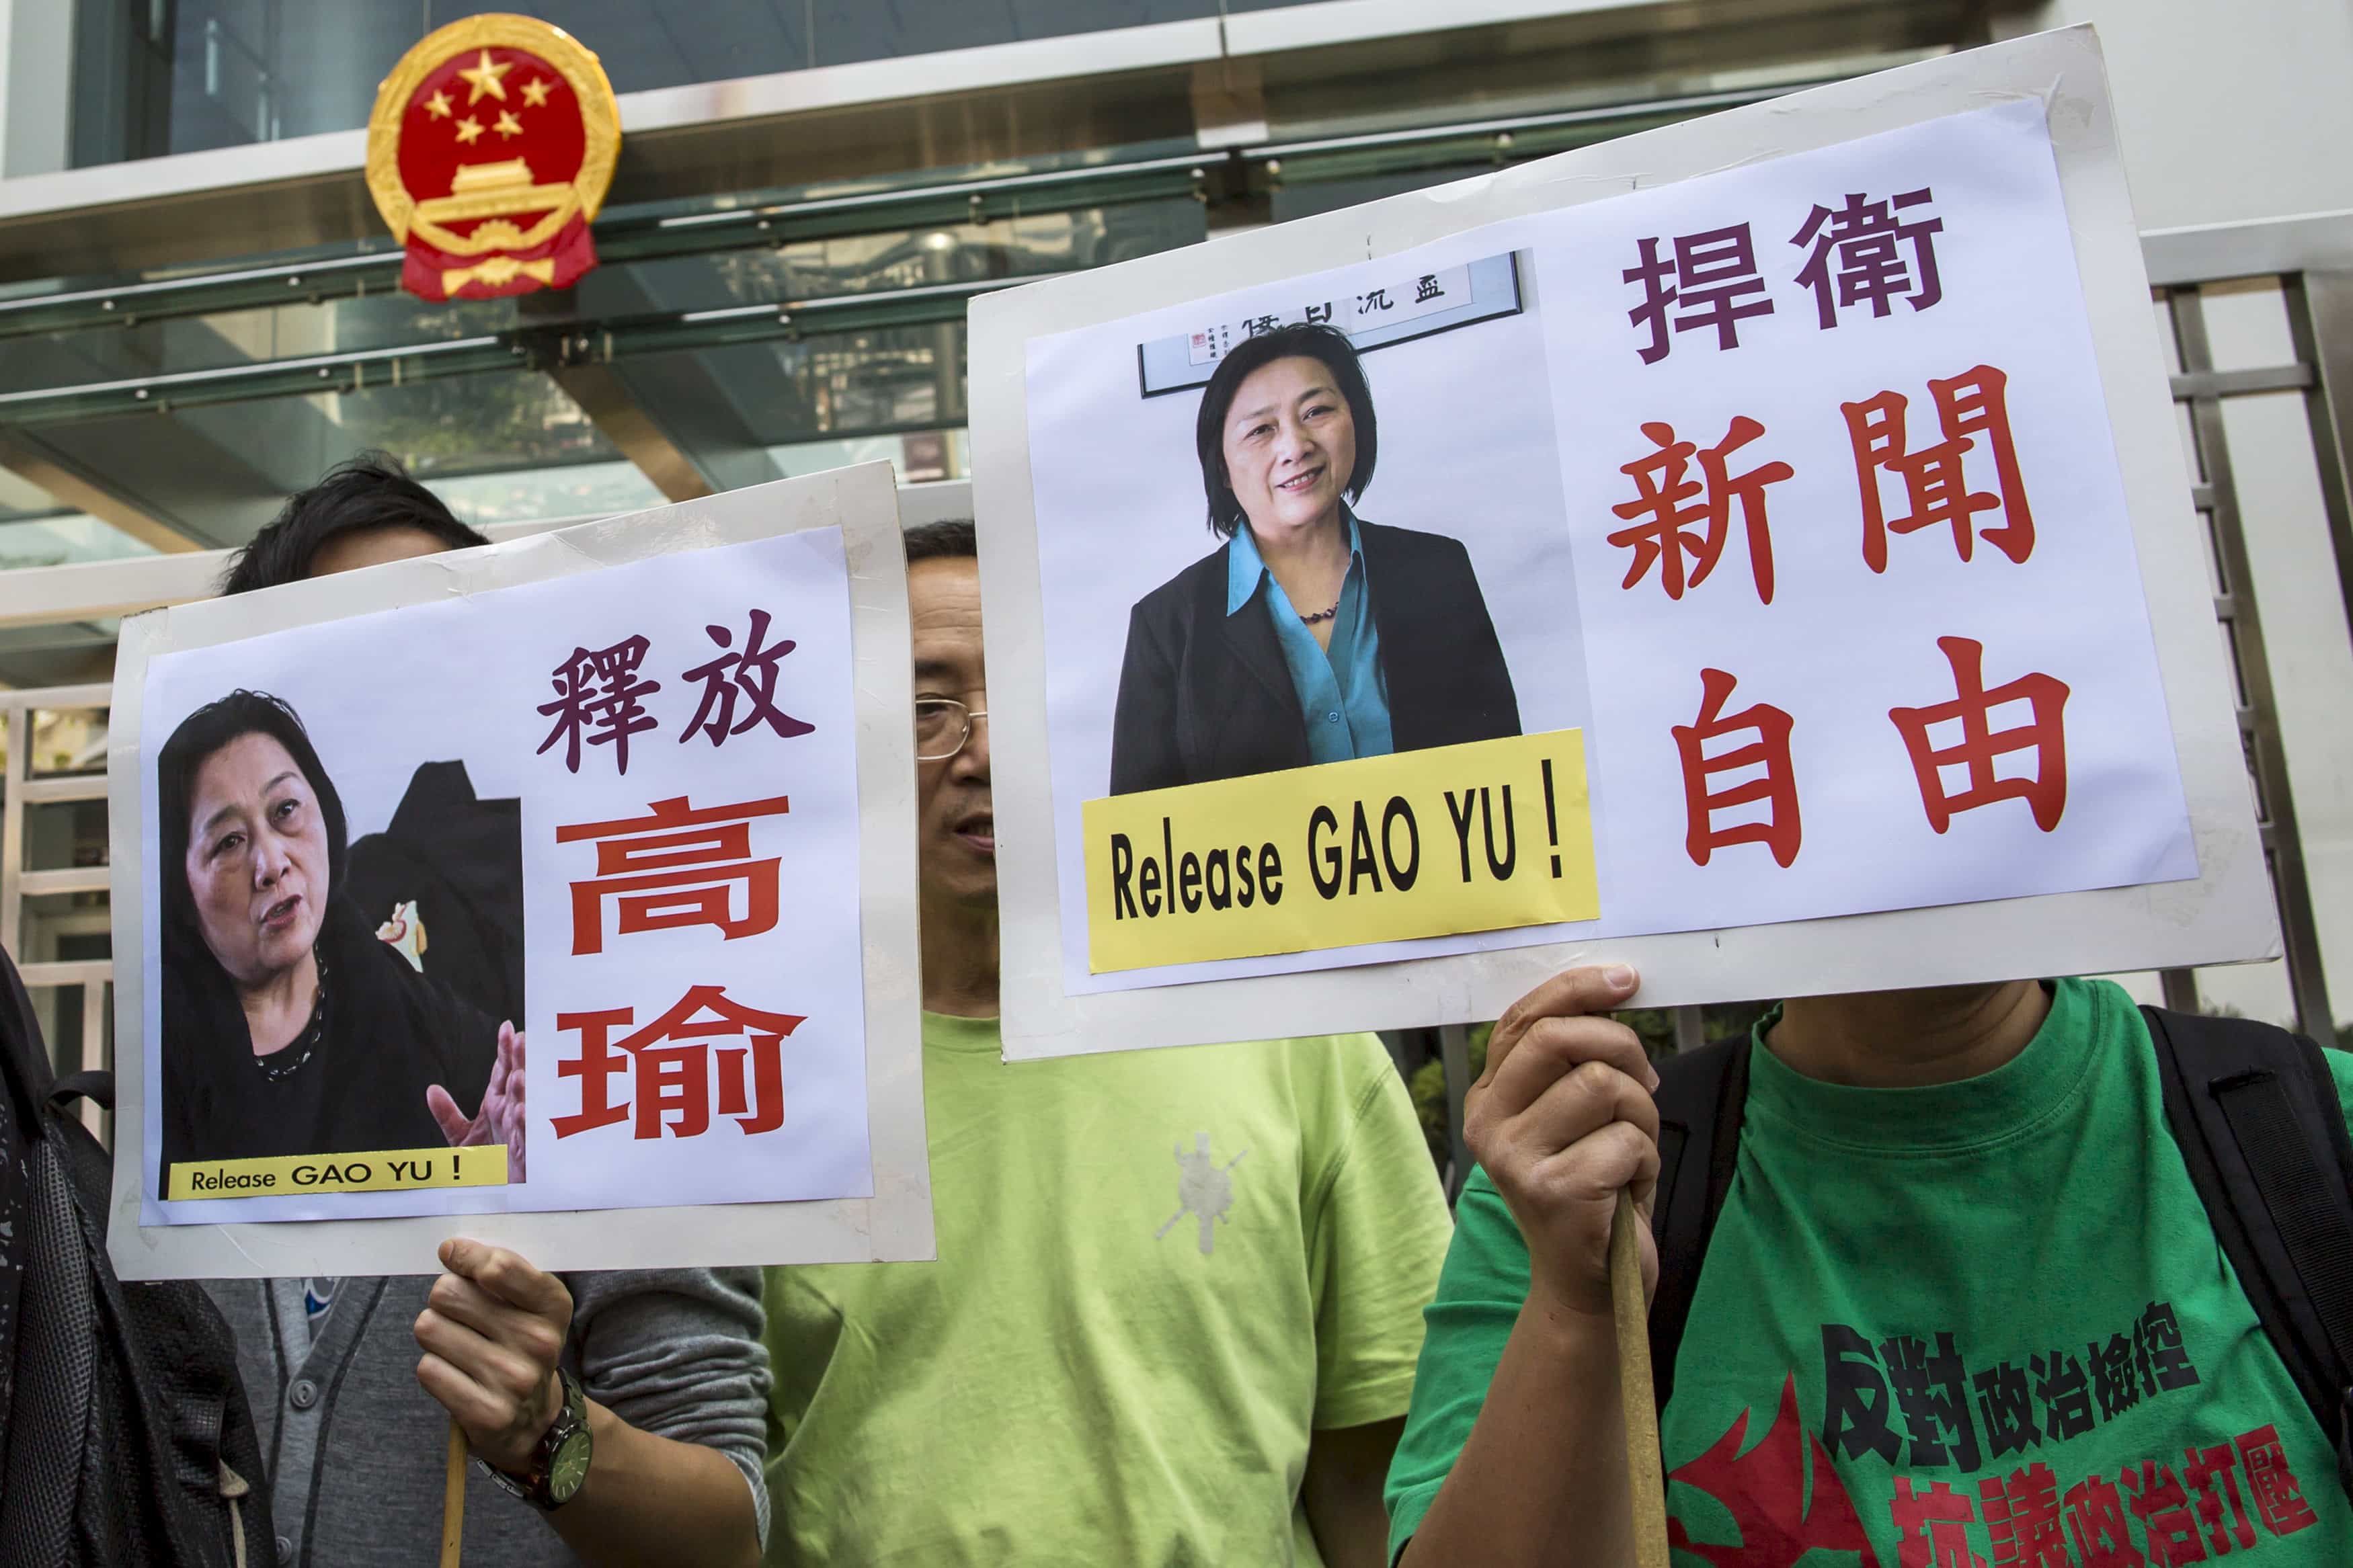 Pro-democracy protesters hold up signs during a demonstration calling for the release of Chinese journalist Gao Yu outside the Chinese liaison office in Hong Kong April 17, 2015. , REUTERS/Tyrone Siu